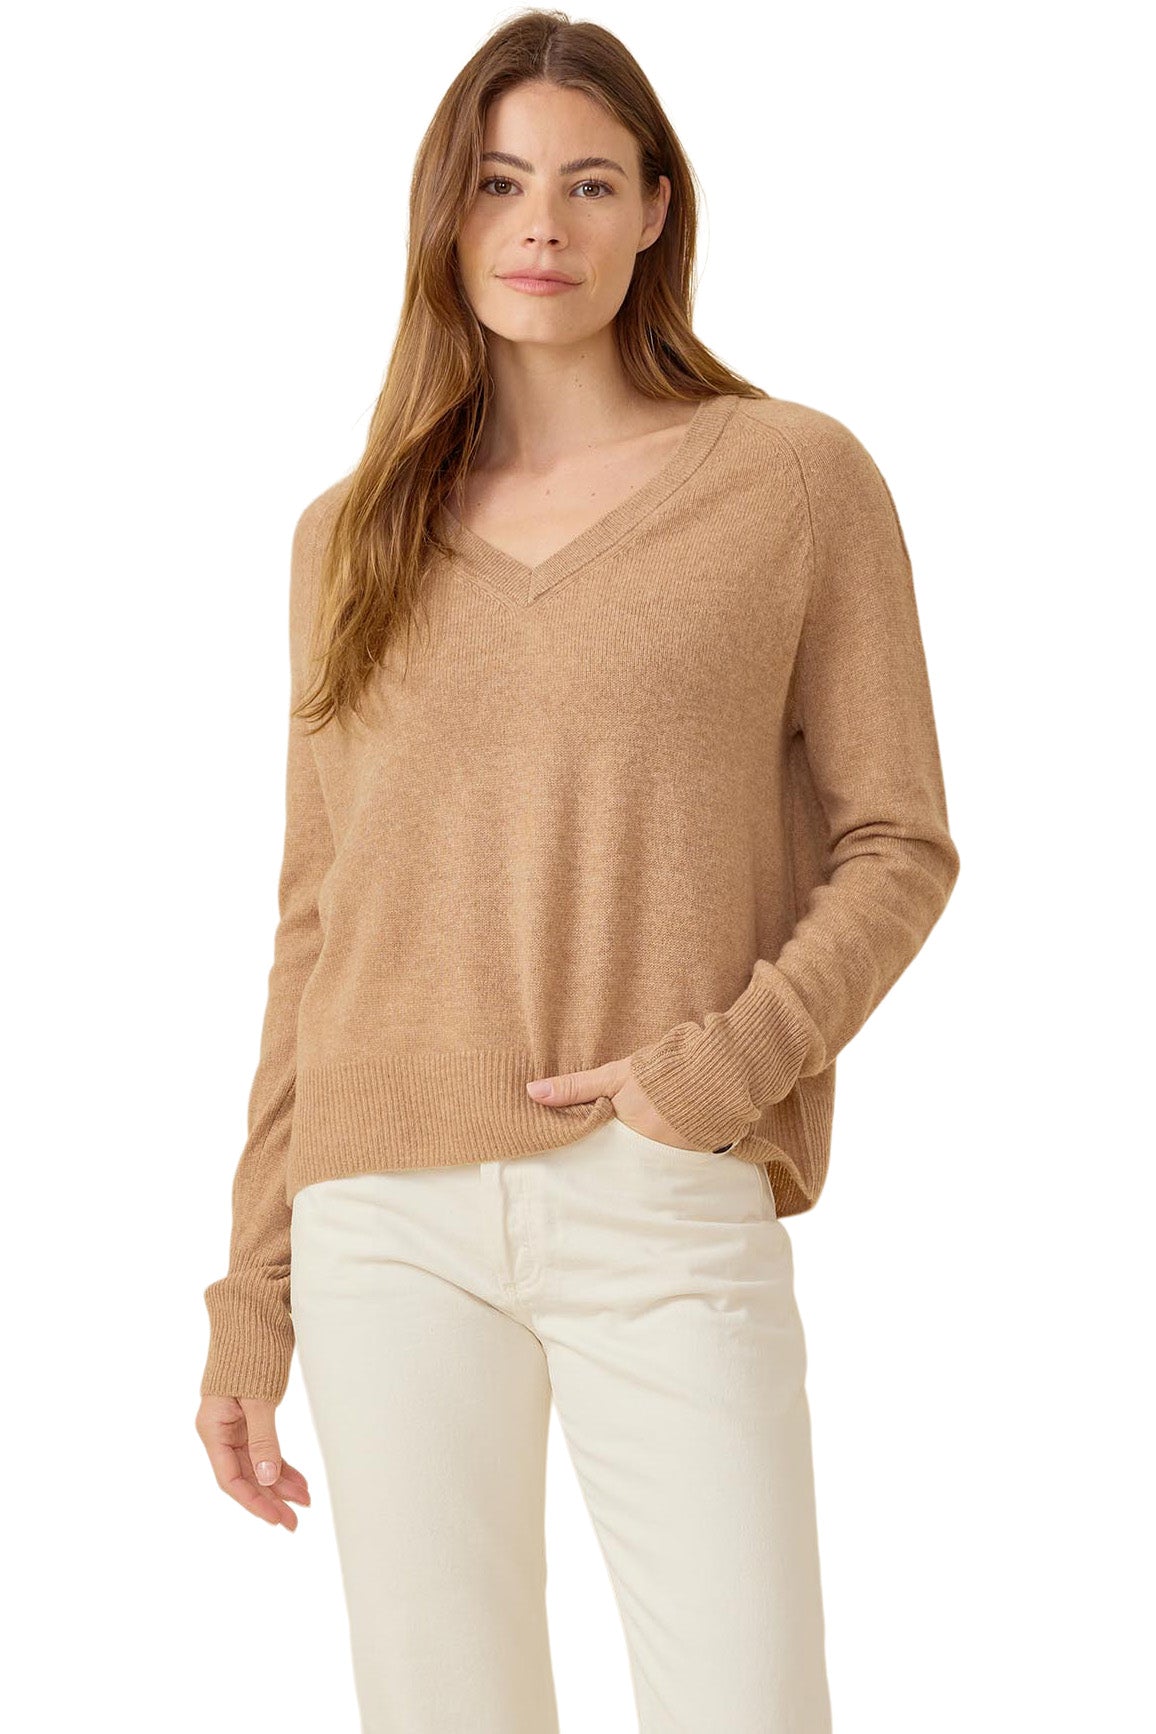 One Grey Day Sloane V-neck Sweater in Fawn